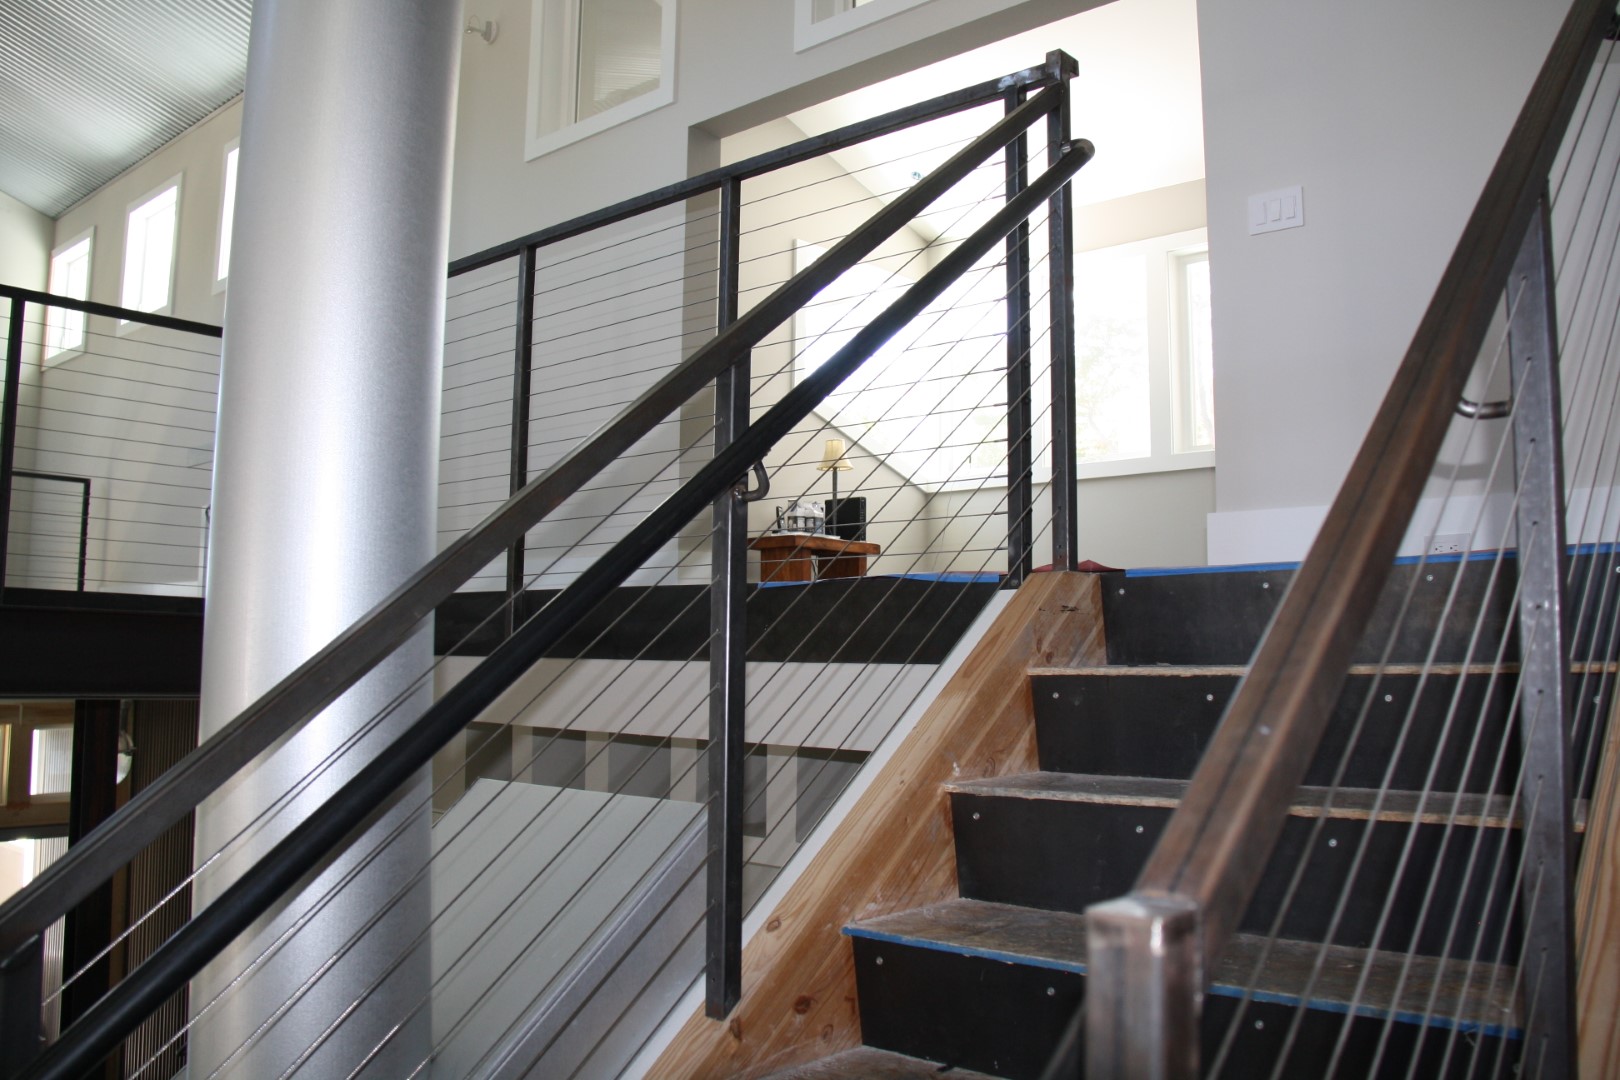 Interior cable railings installed by our team